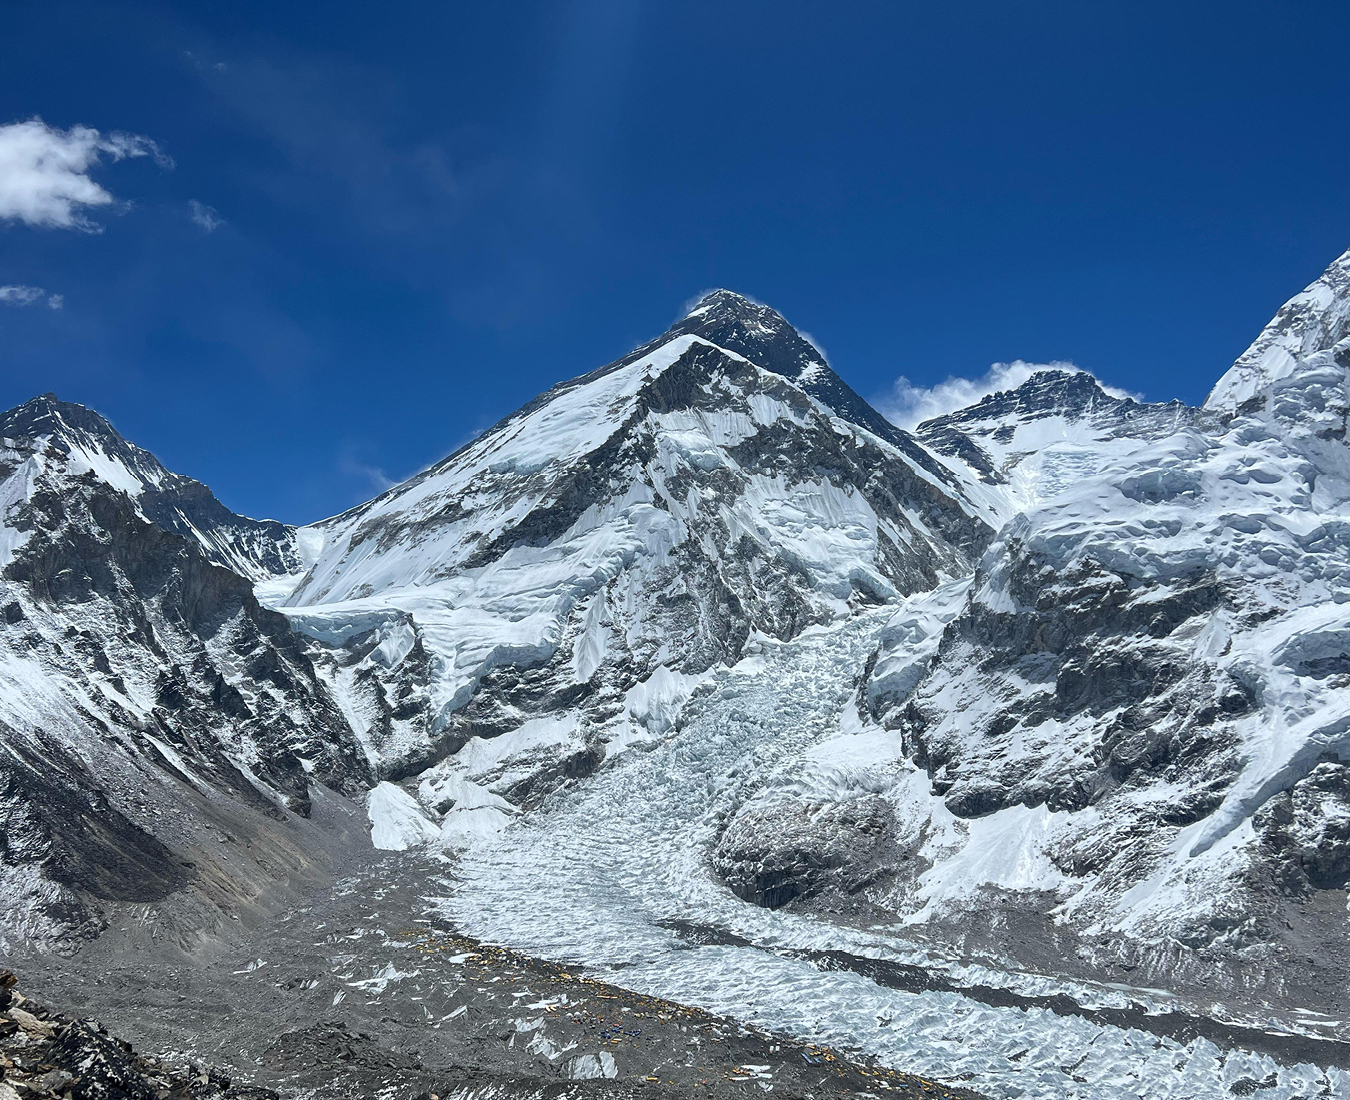 Looking across to Mount Everest, Mount Lhotse and the Khumbu Glacier with Everest Base Camp below.